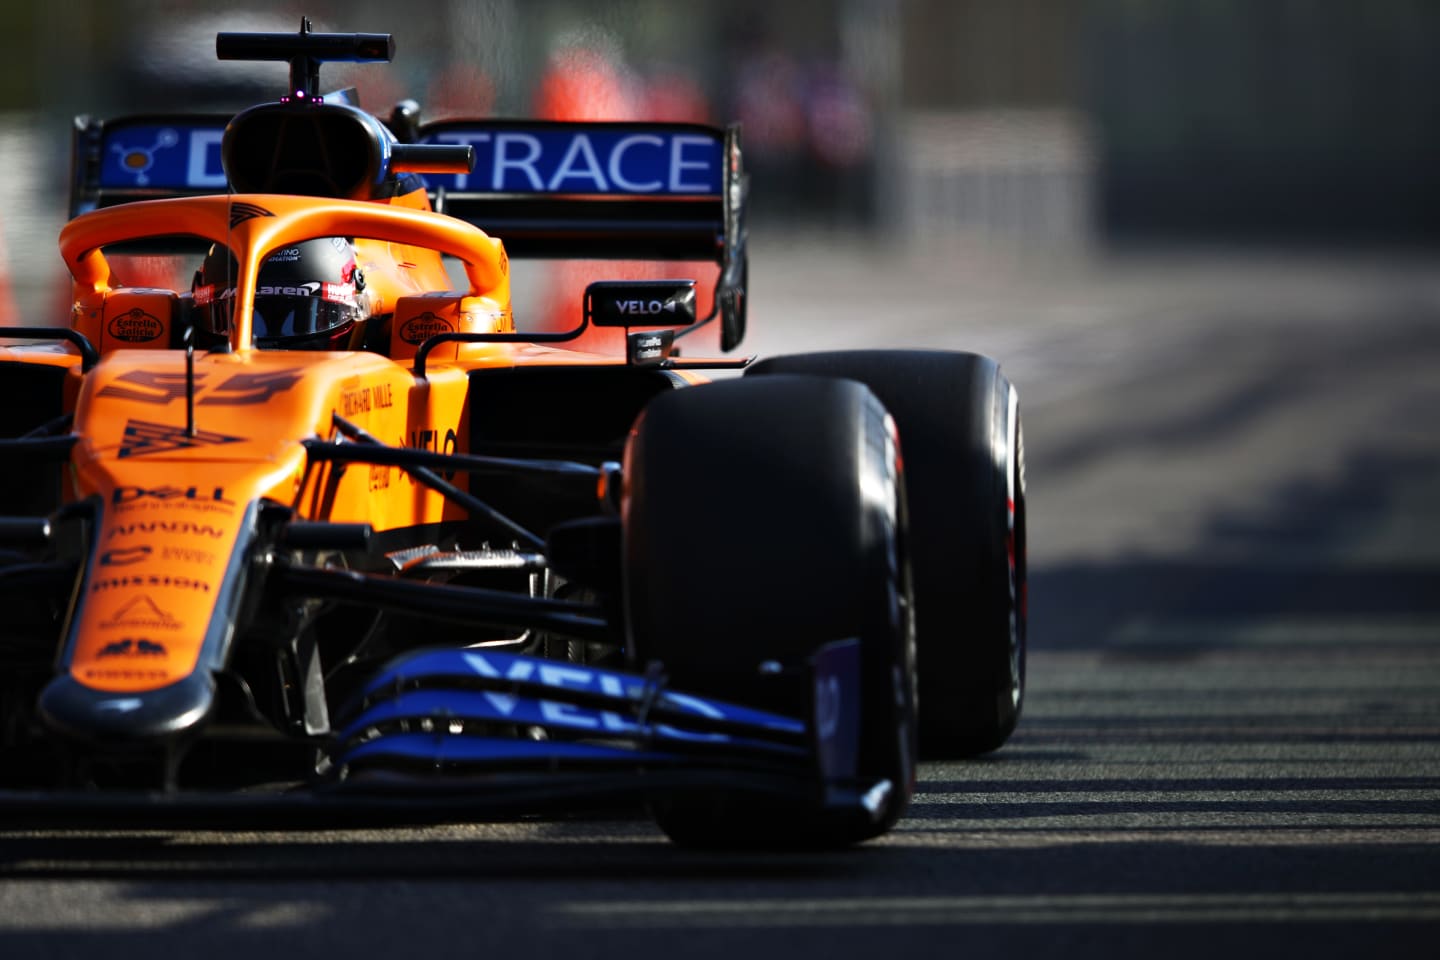 IMOLA, ITALY - OCTOBER 31: Carlos Sainz of Spain driving the (55) McLaren F1 Team MCL35 Renault in the Pitlane during practice ahead of the F1 Grand Prix of Emilia Romagna at Autodromo Enzo e Dino Ferrari on October 31, 2020 in Imola, Italy. (Photo by Mark Thompson/Getty Images)